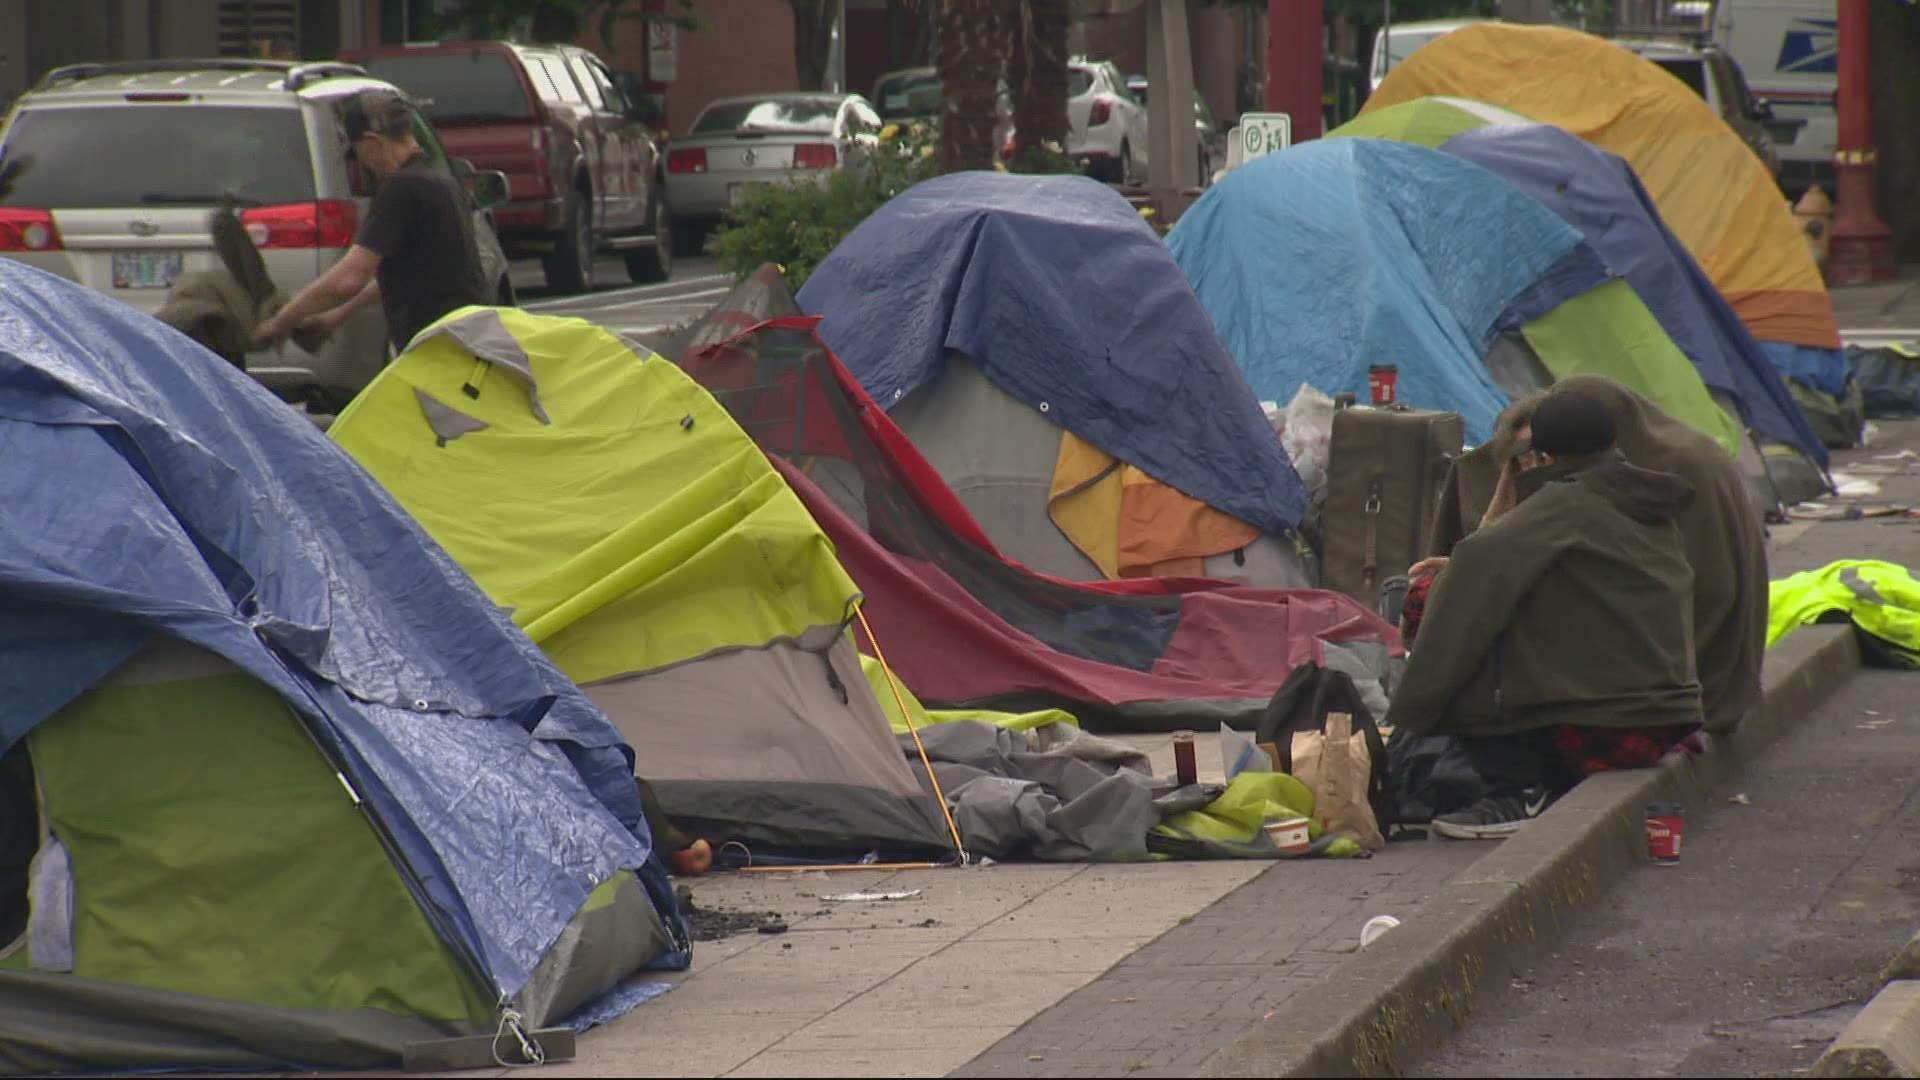 The city said it would begin more aggressively cleaning homeless camps on Monday but it seemed like nothing came to pass.